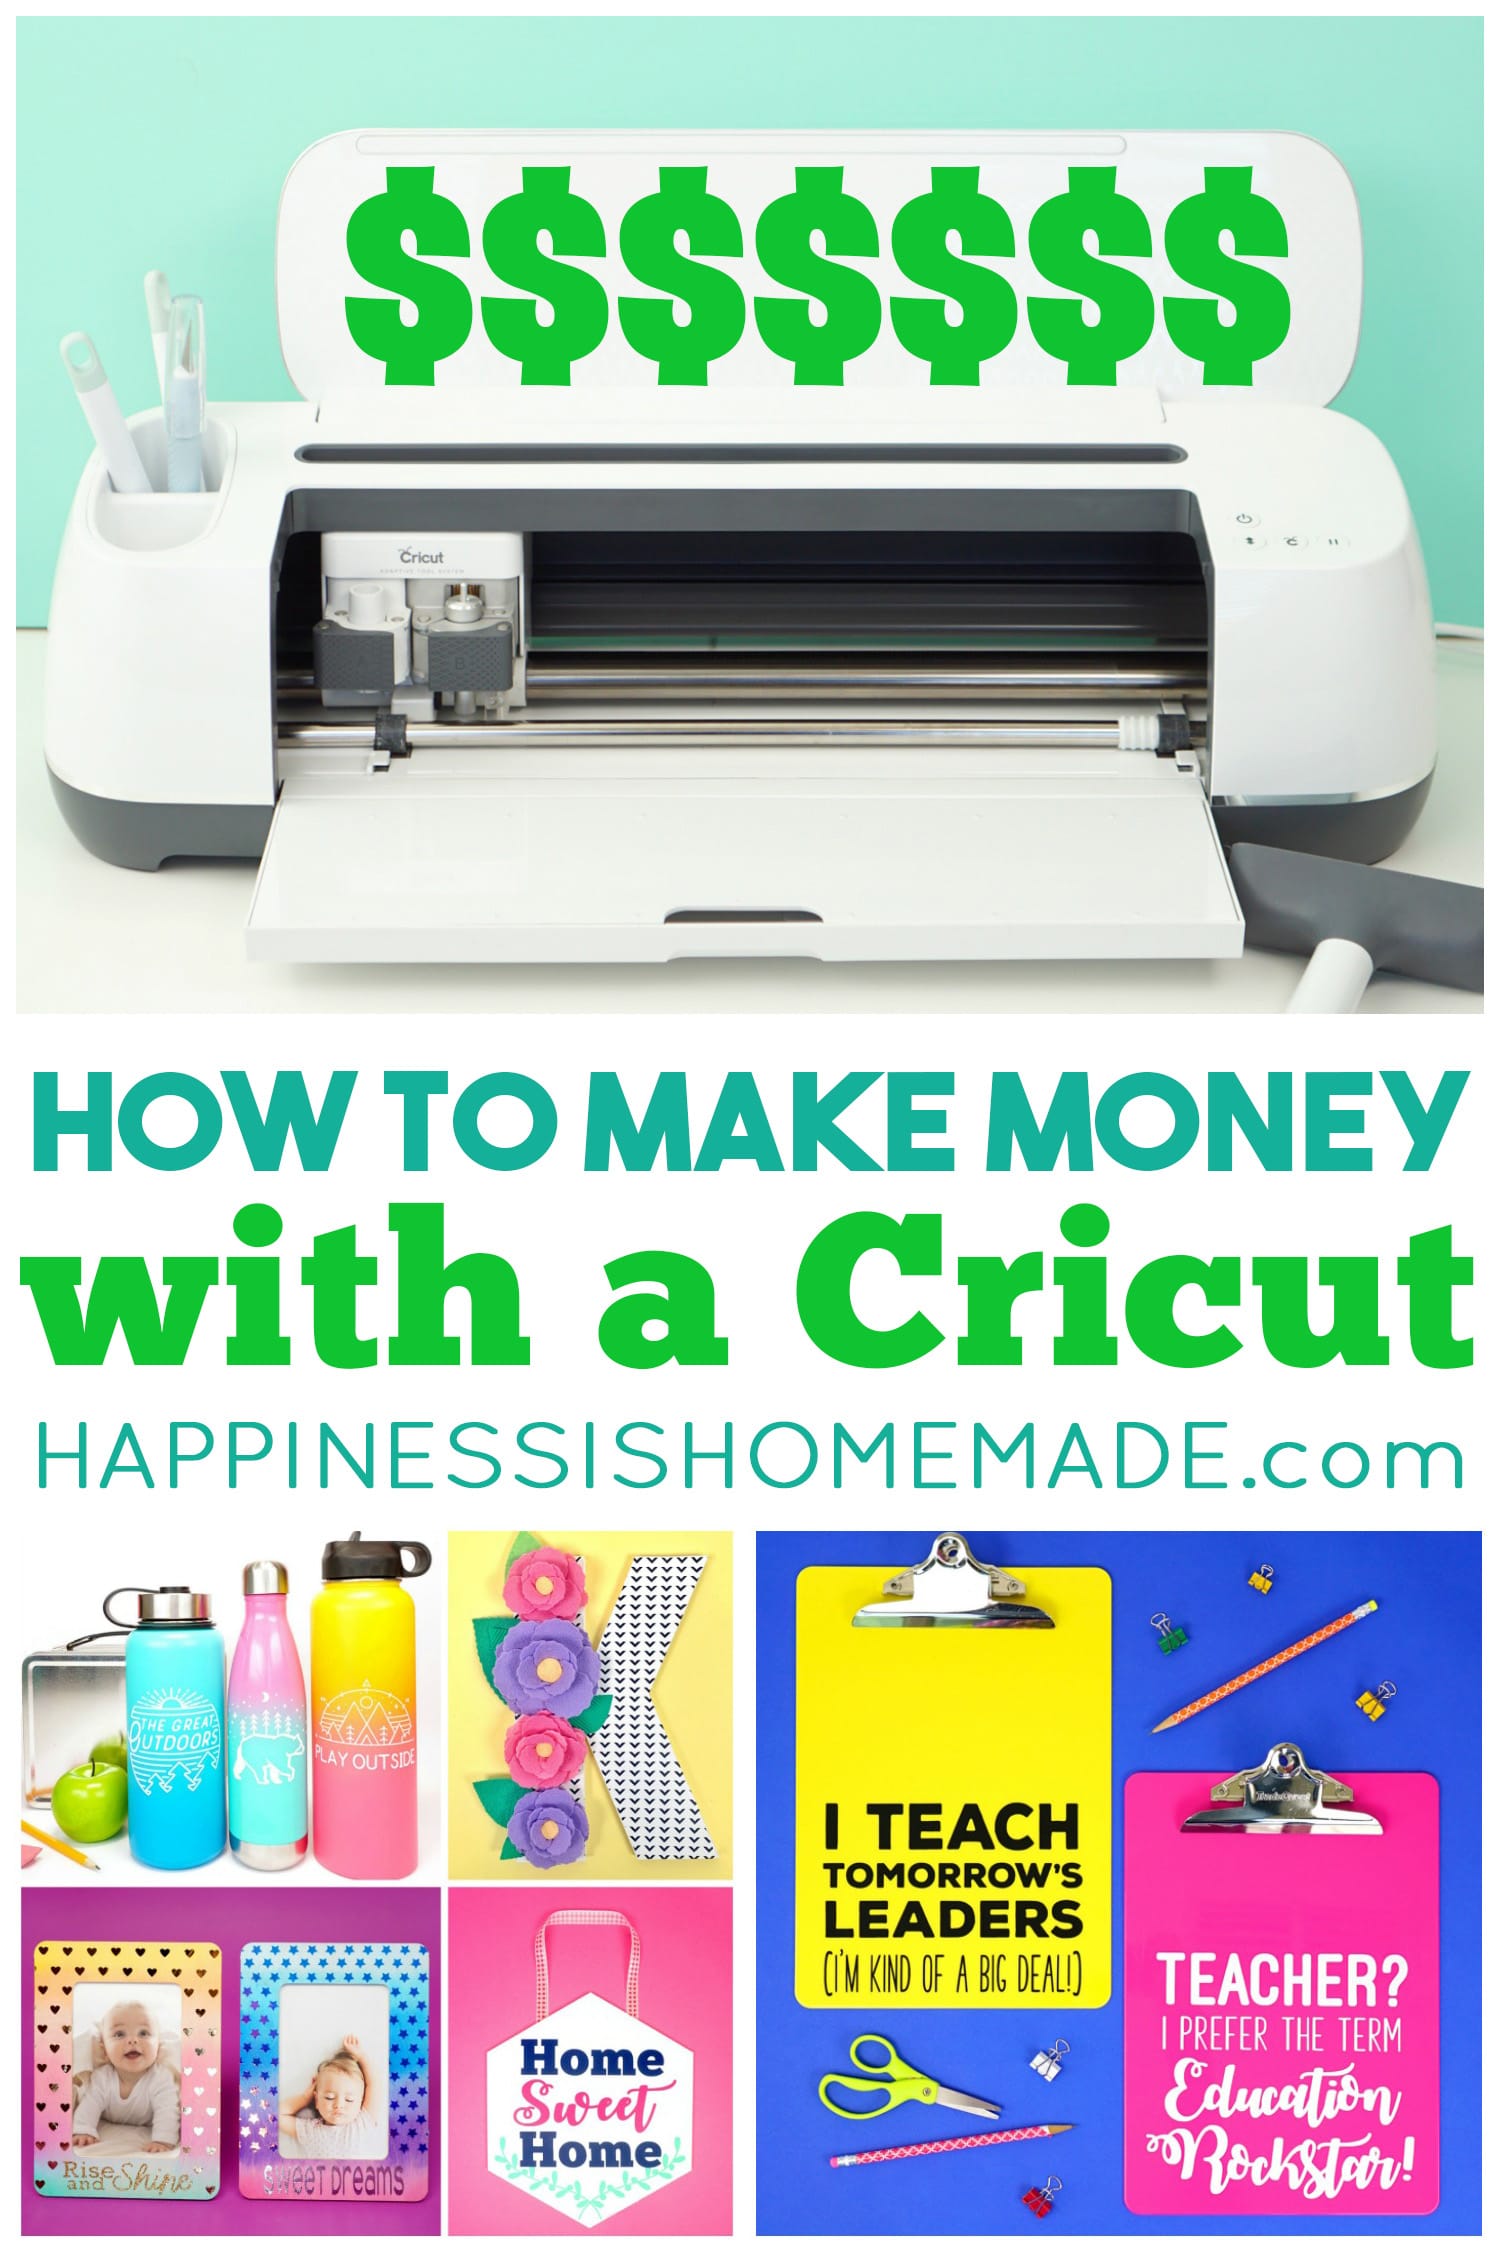 Cricut Maker machine and collage of various projects